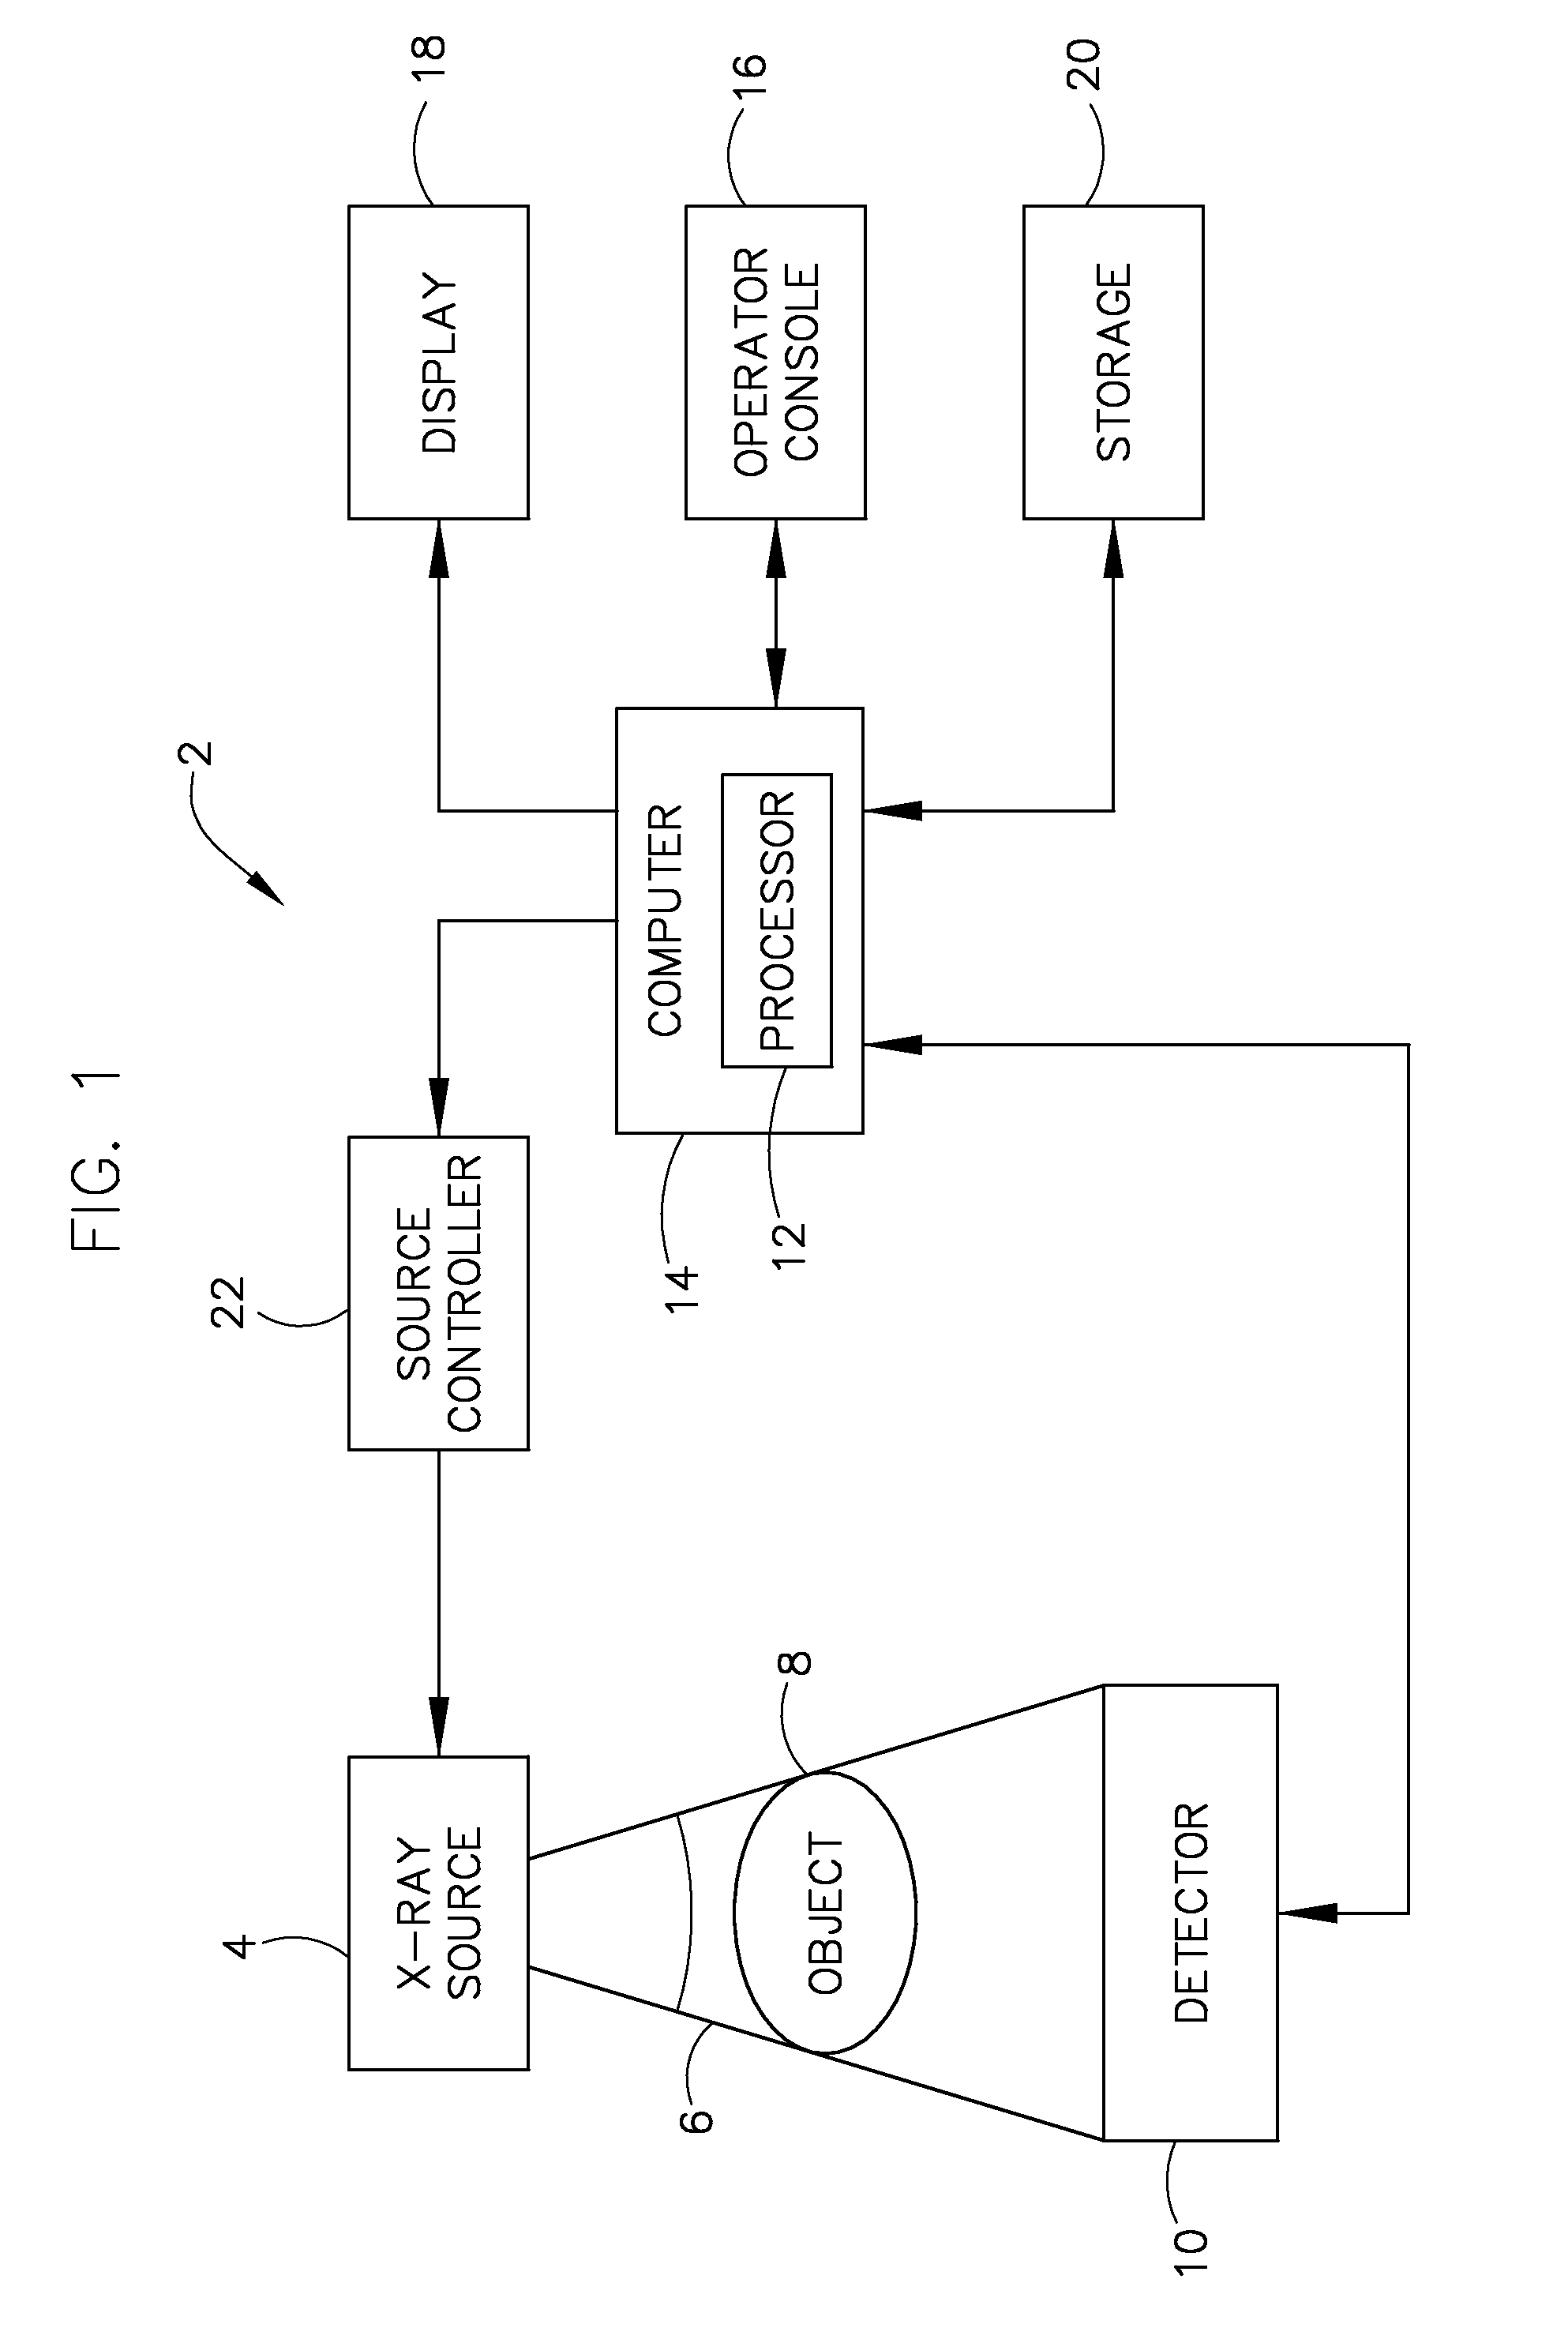 Apparatus for ultra high vacuum thermal expansion compensation and method of constructing same